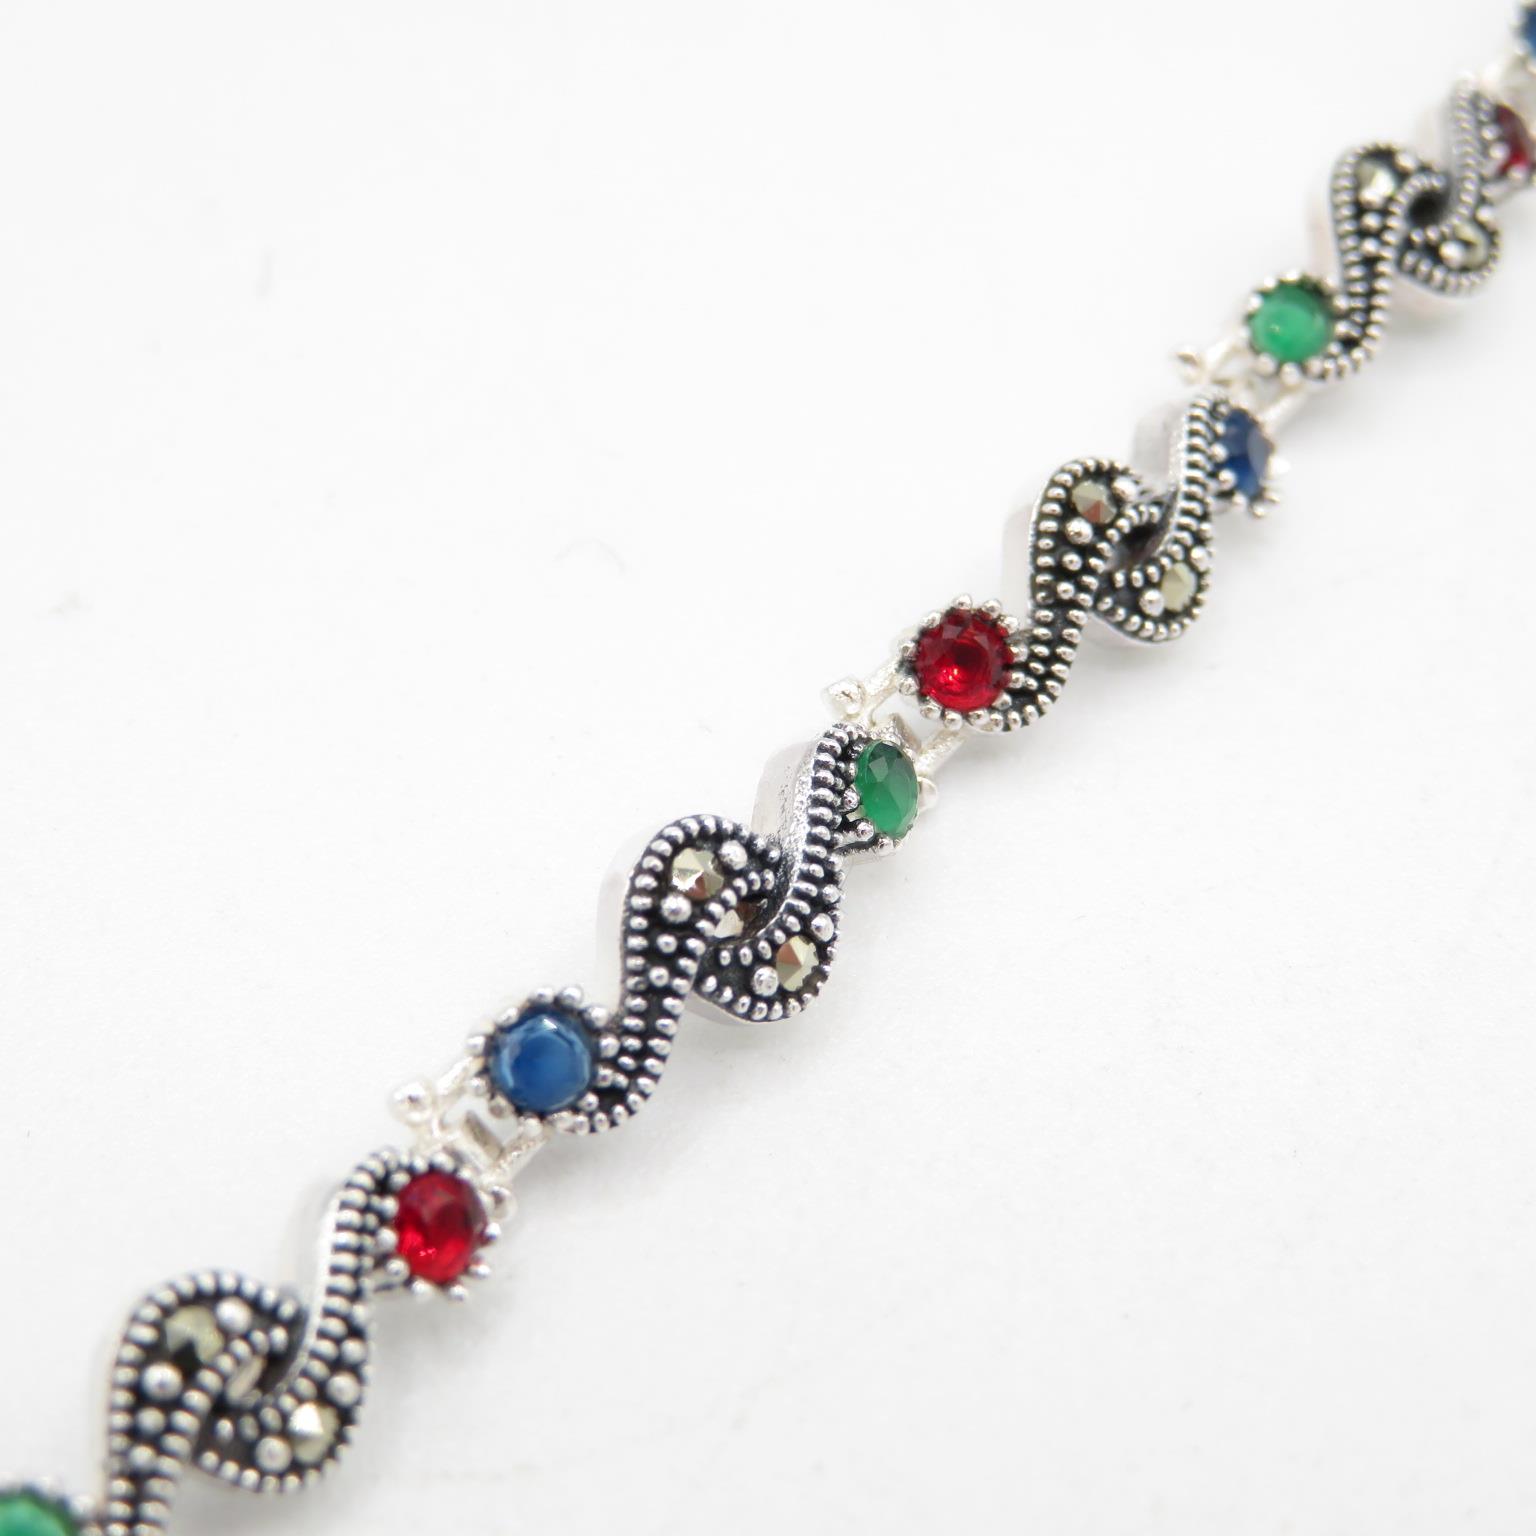 HM 925 Sterling Silver bracelet set with green, blue and red stones (12g) in excellent condition - - Bild 2 aus 5